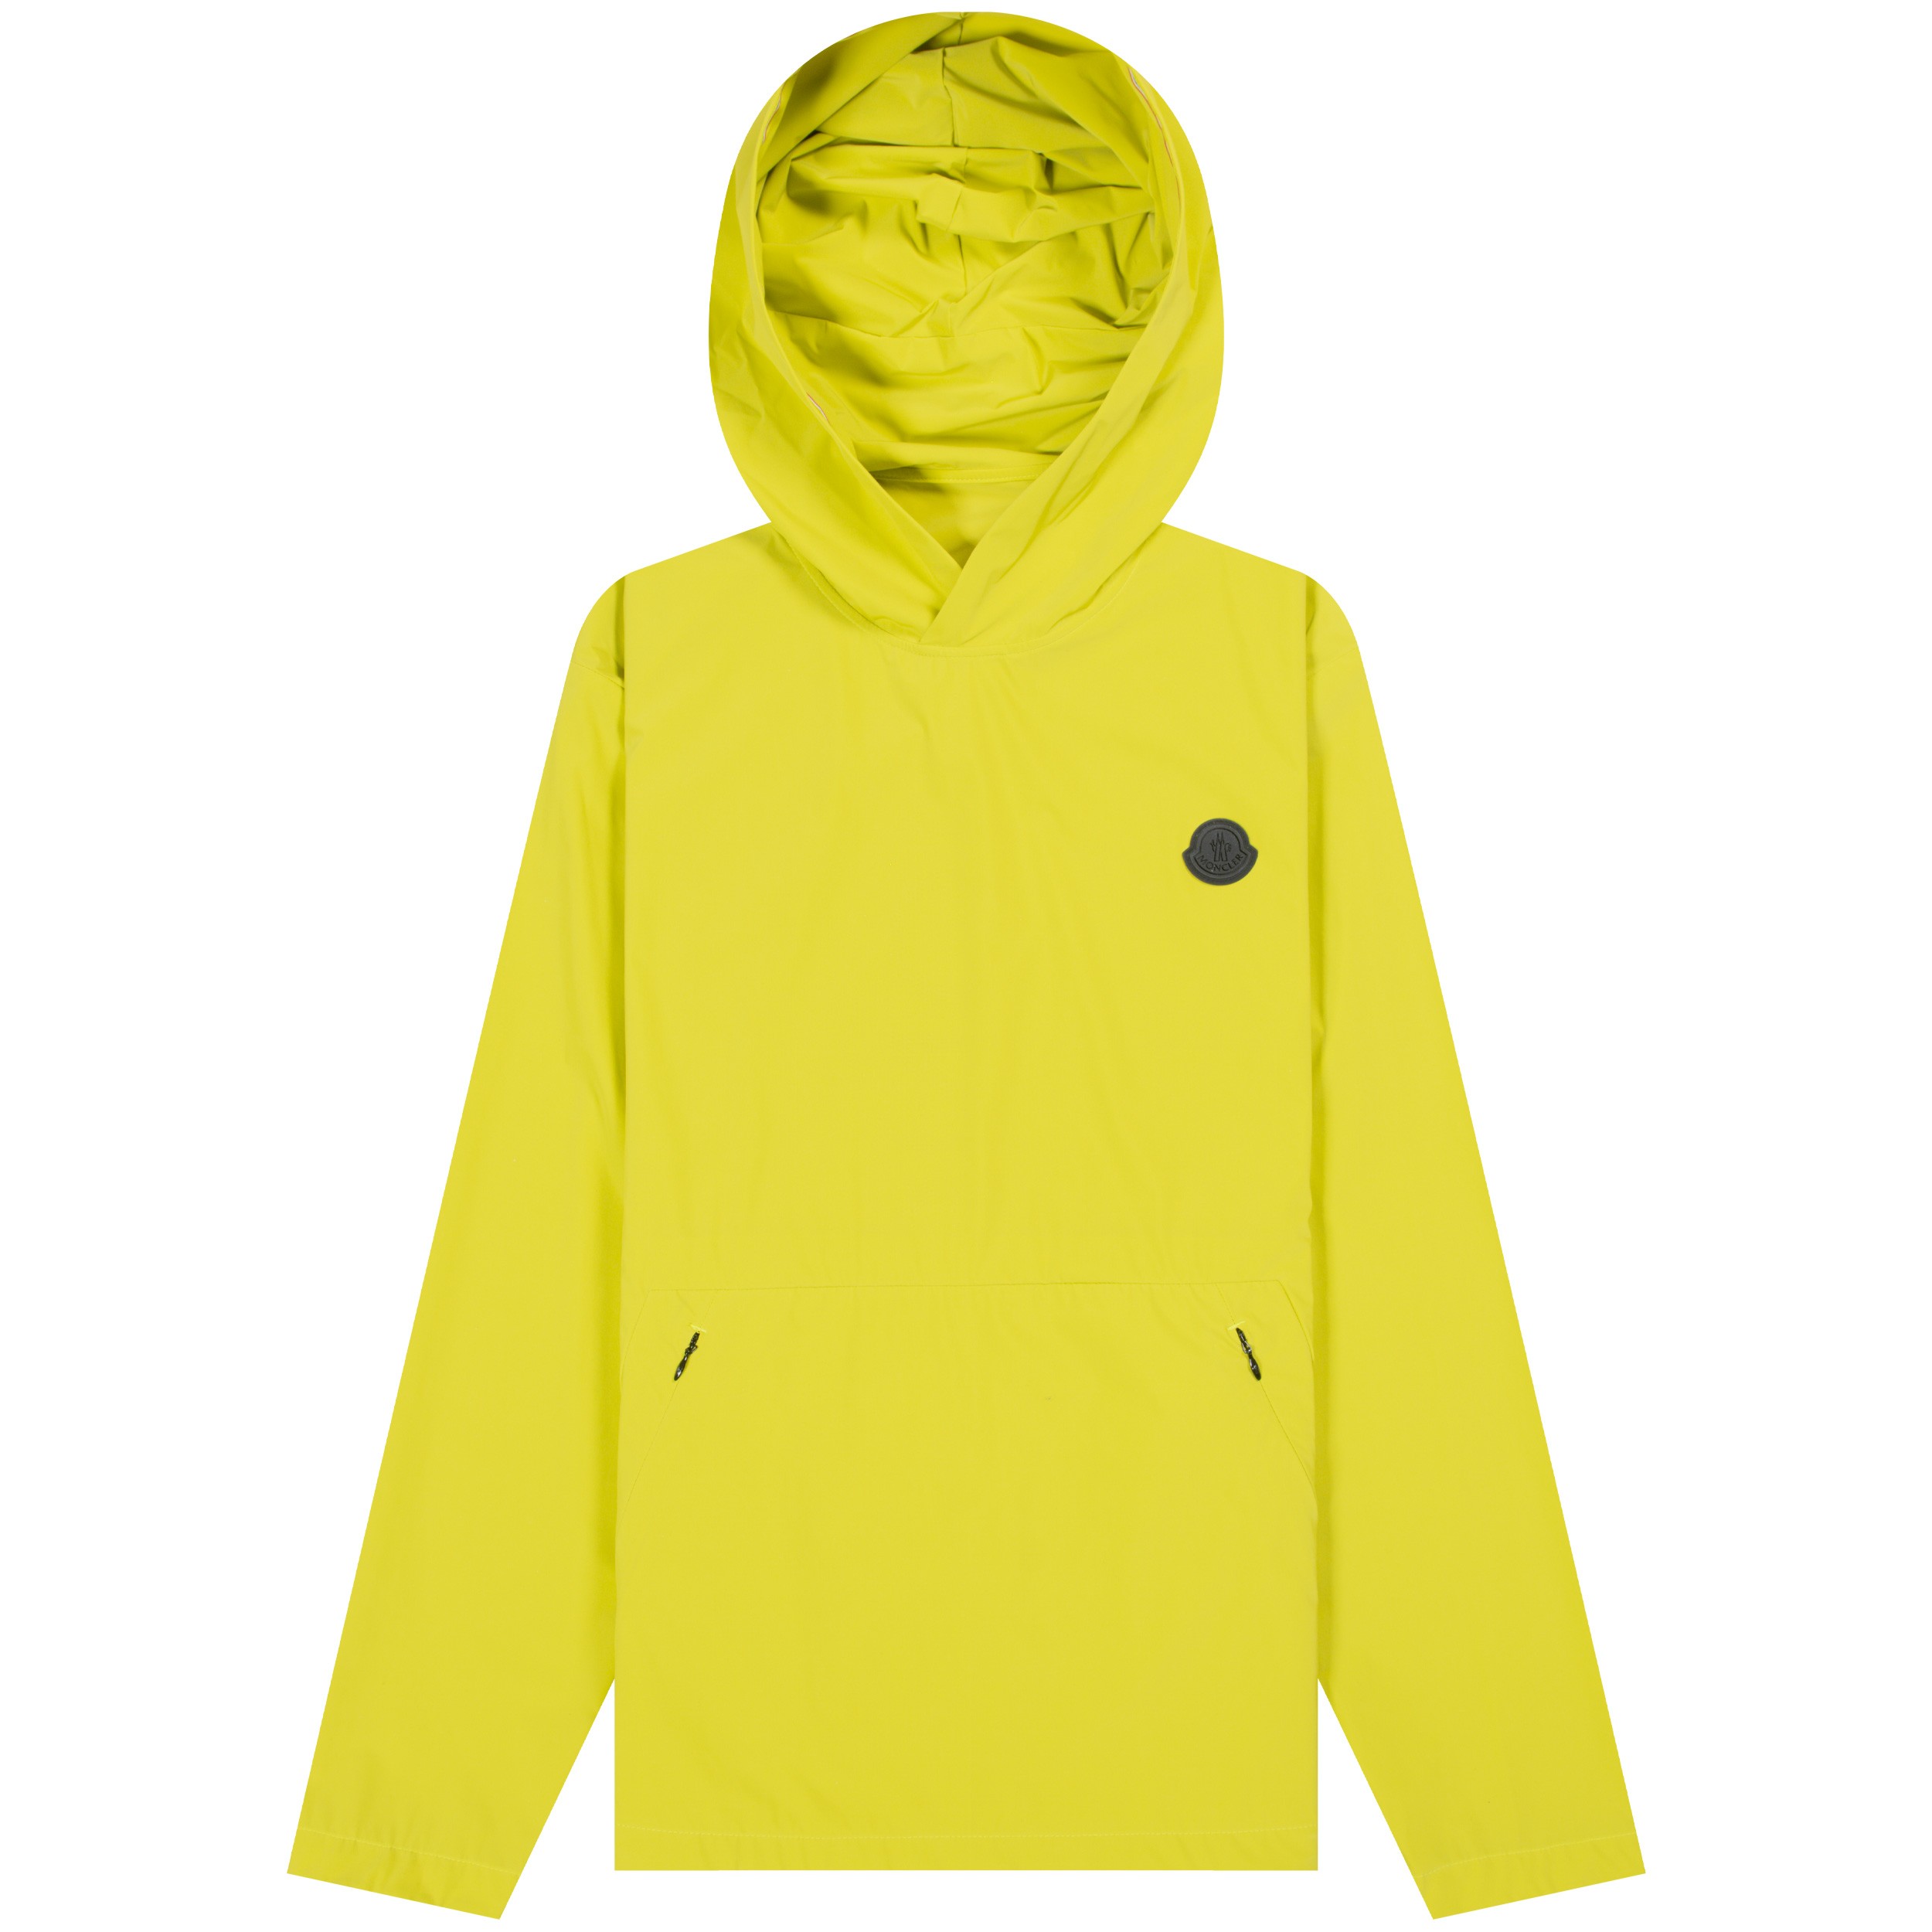 Moncler 'Escalle' Pull Over Light Jacket Yellow